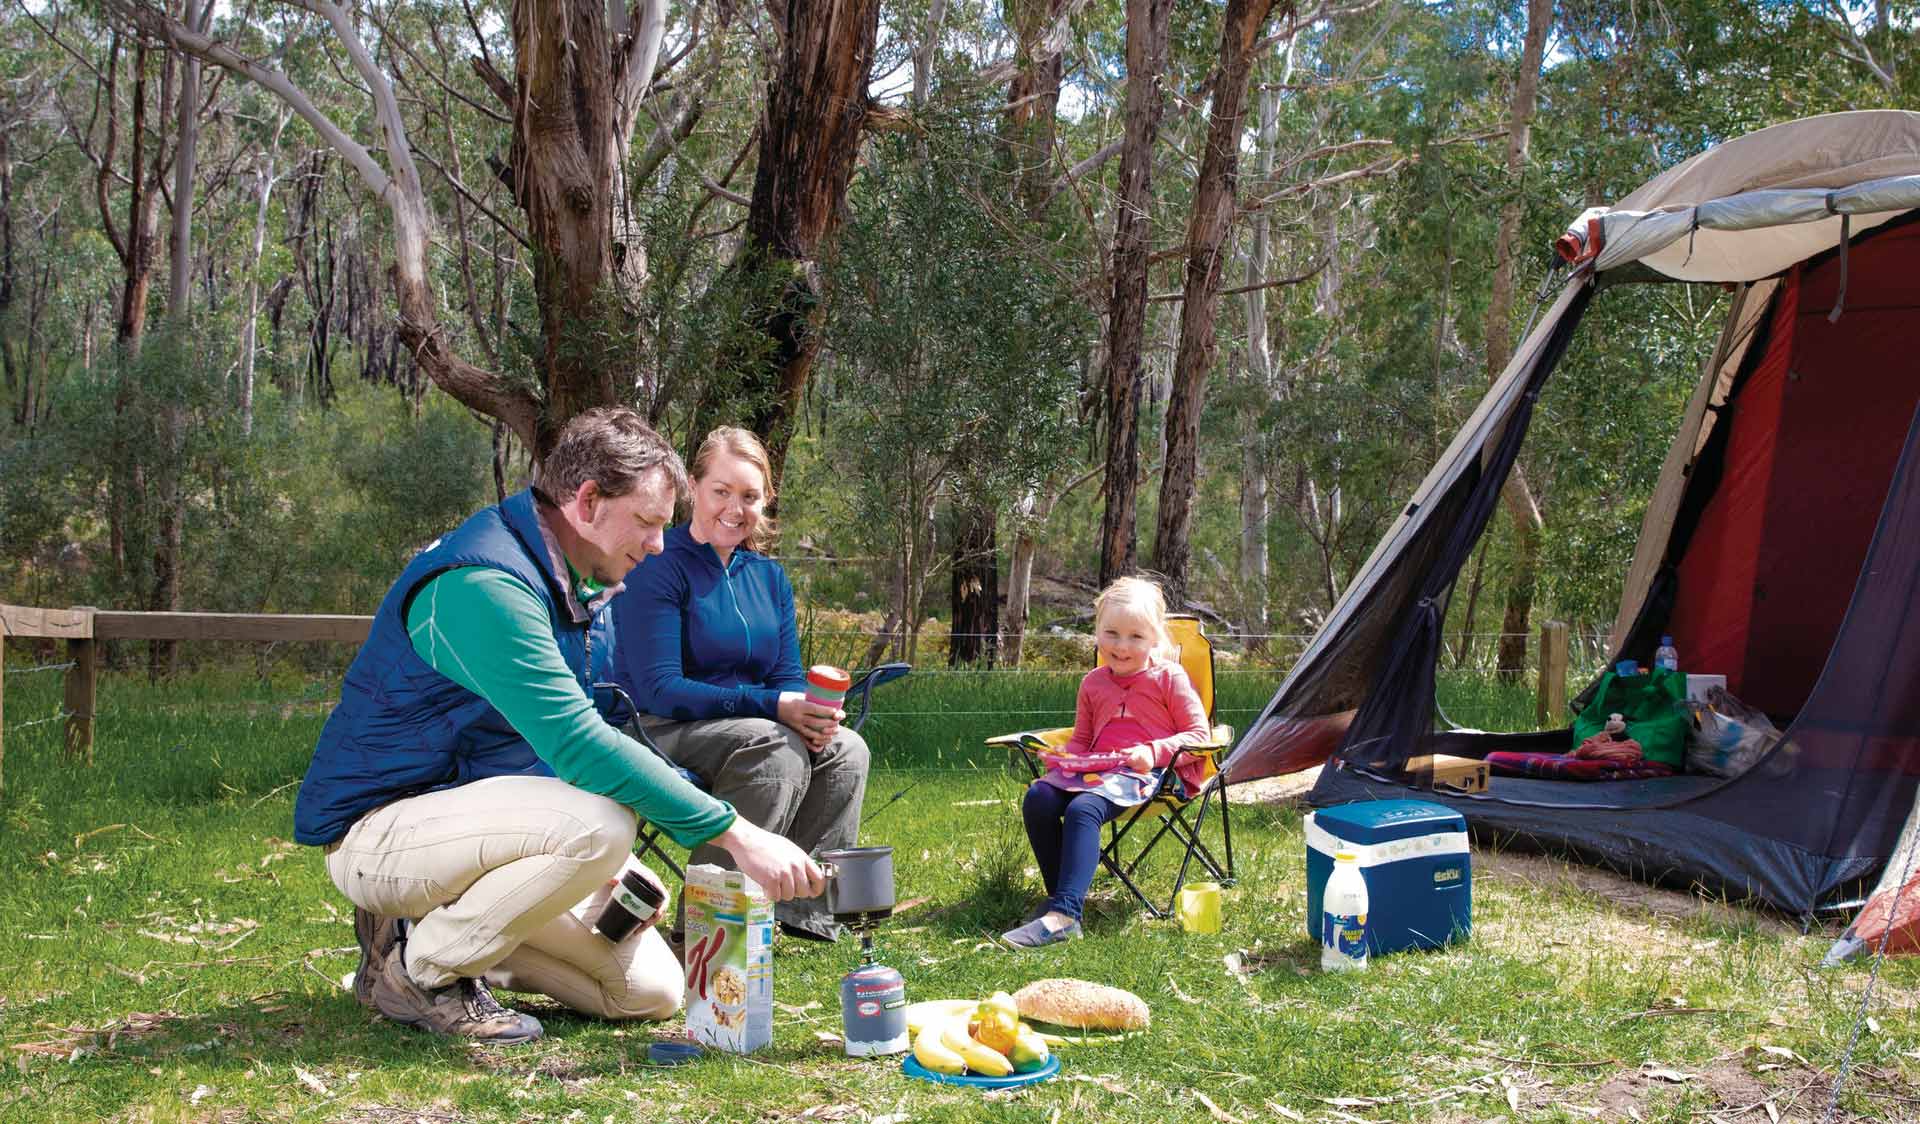 A family camps at Borough Huts in the Grampians National Park